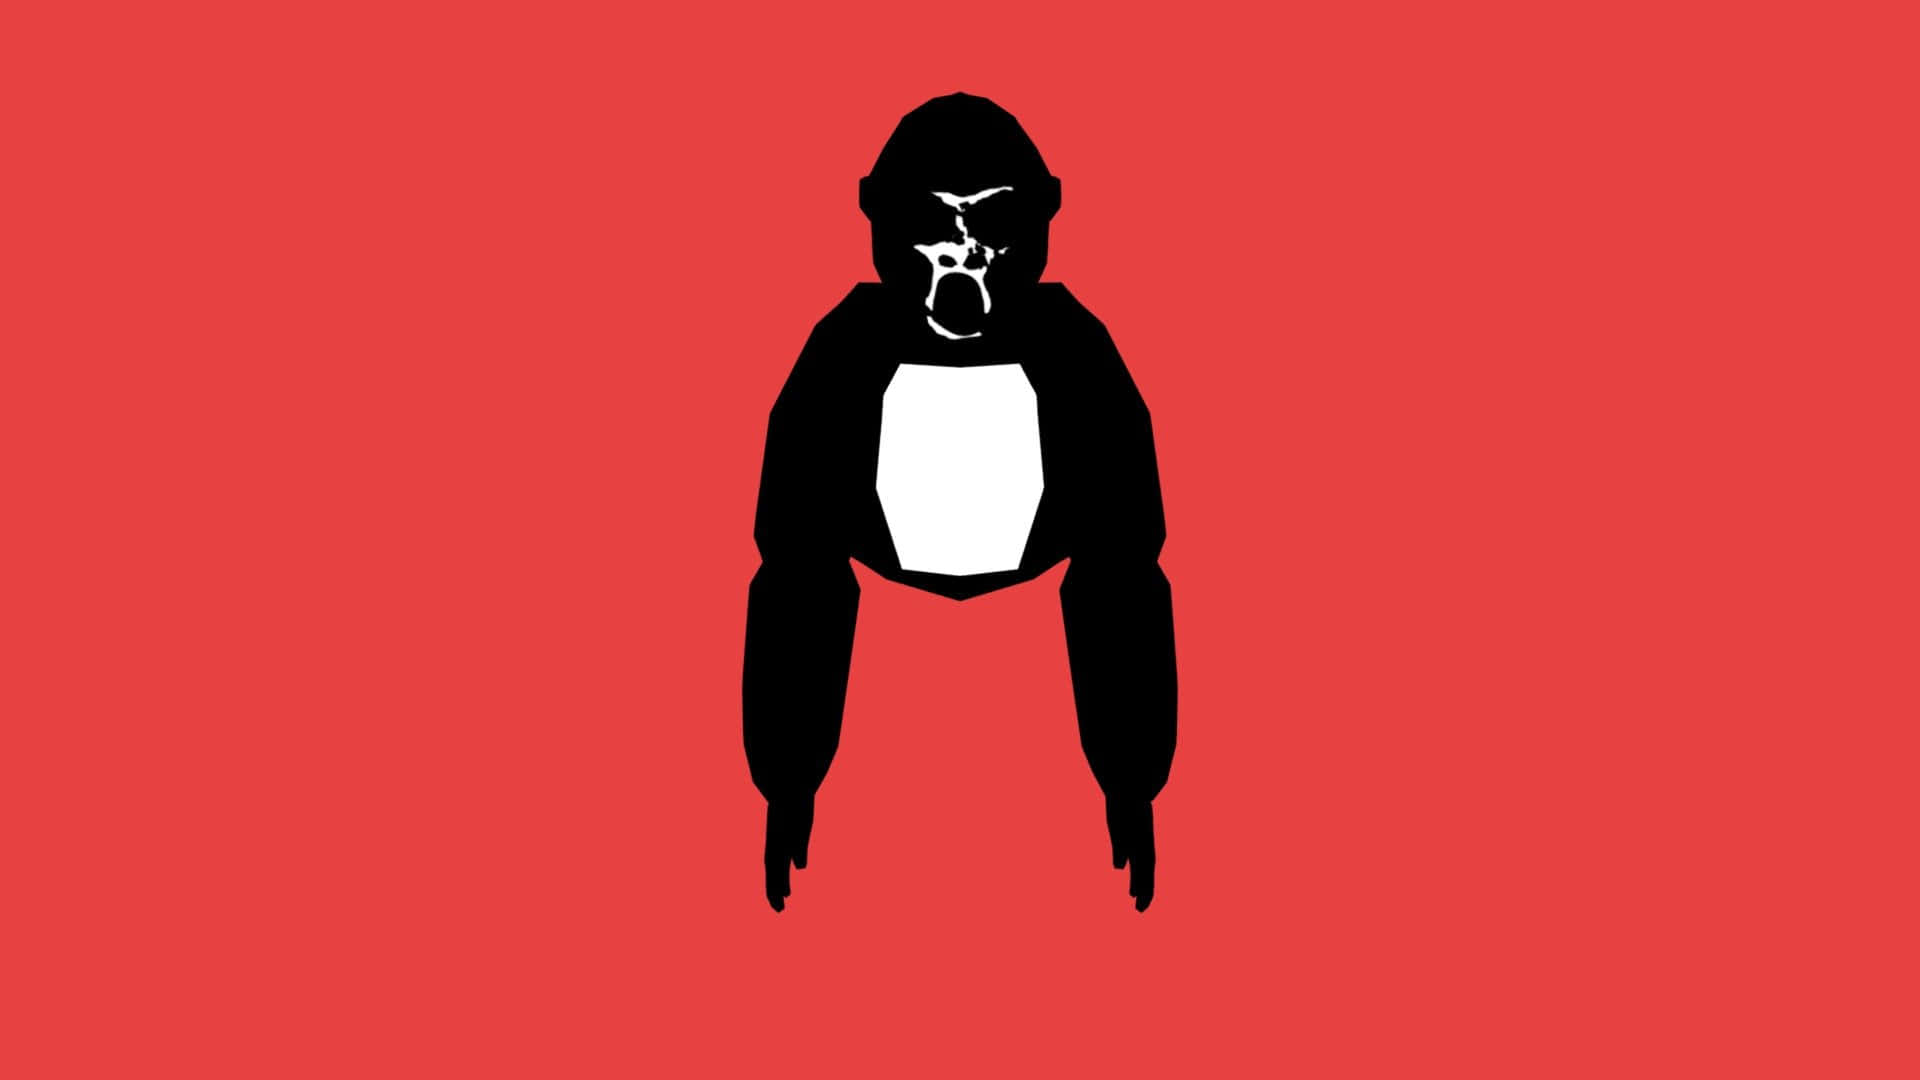 A Black And White Image Of A Penguin On A Red Background Wallpaper